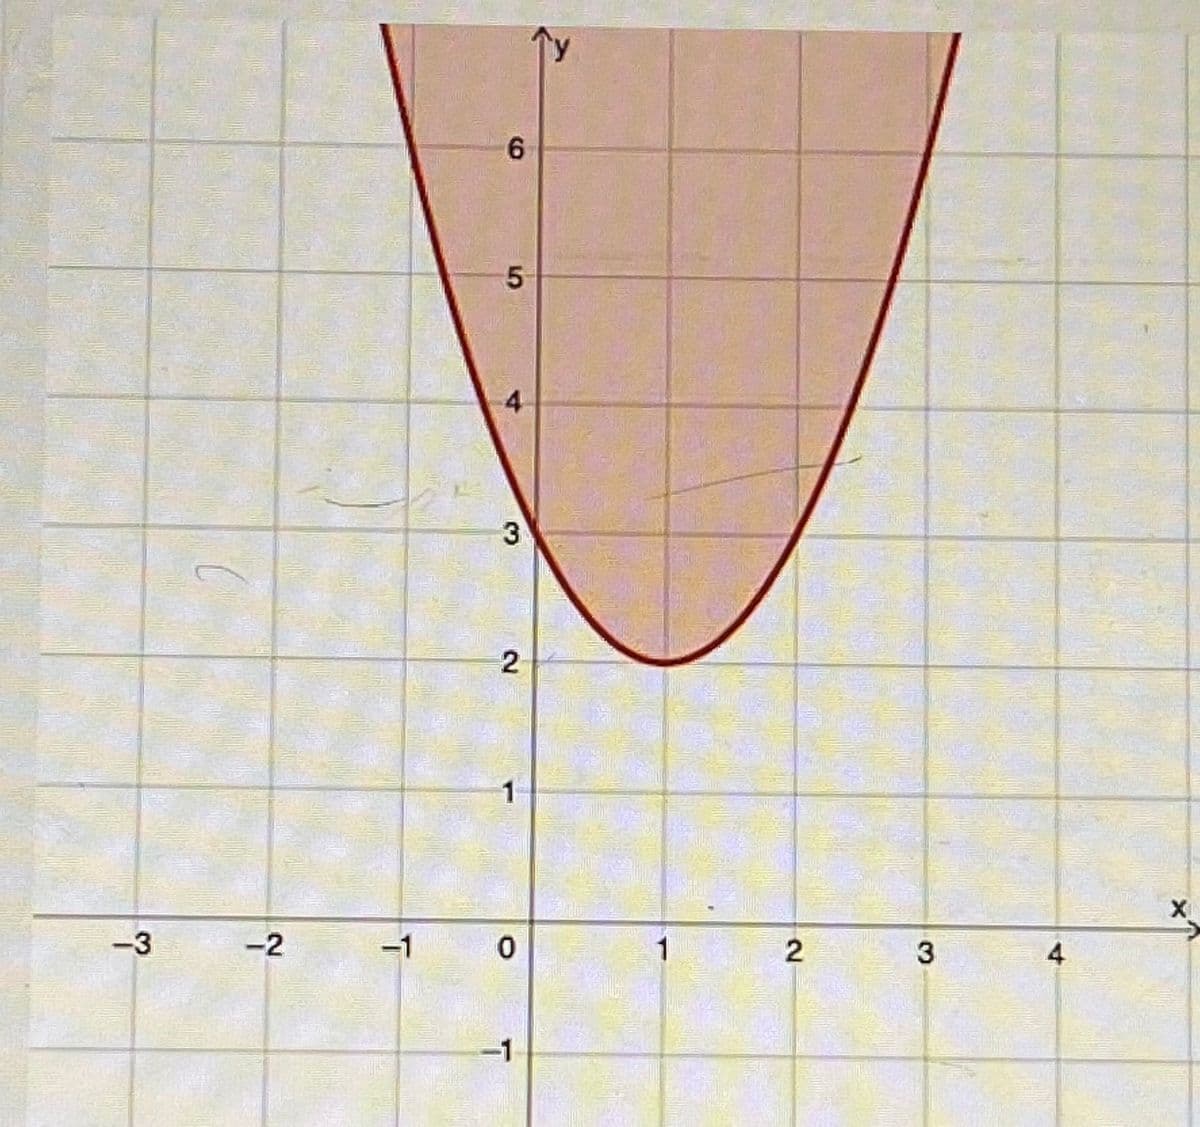 ### Understanding Quadratic Functions: Parabolic Graph Analysis

In this educational module, we will delve deep into quadratic functions and their graphical representations. Specifically, we will focus on the parabolic graph which is a fundamental concept in algebra and calculus.

#### Parabolic Graph Analysis

The image above showcases a parabola, which is the graphical representation of a quadratic function. Here's a detailed breakdown of the graph for educational purposes:

1. **Graph Description**:
   - **Axes**: The graph features two perpendicular axes: the horizontal axis (x-axis) and the vertical axis (y-axis).
   - **Parabola Orientation**: This parabola opens upwards, indicating that the quadratic function has a positive leading coefficient.

2. **Vertex**:
   - The vertex of the parabola appears to be at the point (0, 2). The vertex is the minimum point on the graph of a parabola that opens upwards.

3. **Intersection with y-axis**:
   - The parabola intersects the y-axis at y = 2, which is also the vertex in this particular graph.

4. **Shape and Symmetry**:
   - The parabola is symmetrical about the vertical line passing through its vertex, which in this case is the y-axis (x = 0).

5. **Shaded Region**: 
   - The area under the curve of the parabola is shaded, indicating the region for which the quadratic function yields values less than or equal to the function's value at the vertex.

6. **Scale**:
   - The horizontal axis (x-axis) is scaled from -3 to +4.
   - The vertical axis (y-axis) is scaled from -1 to +7.

#### Key Insights:

- **Equation Form**: The standard form of the equation of a parabola is \( y = ax^2 + bx + c \). In this case, the quadratic function is of the form \( y = x^2 + 2 \), suggested by the vertex at (0, 2) and the symmetry of the graph.
  
- **Vertex Form**: Another way to express the equation of a parabola is the vertex form, \( y = a(x-h)^2 + k \). Here, \( h = 0 \) and \( k = 2 \), corresponding to the vertex coordinates (0, 2).

- **Applications**: Understanding the shape and properties of parabolas is crucial in